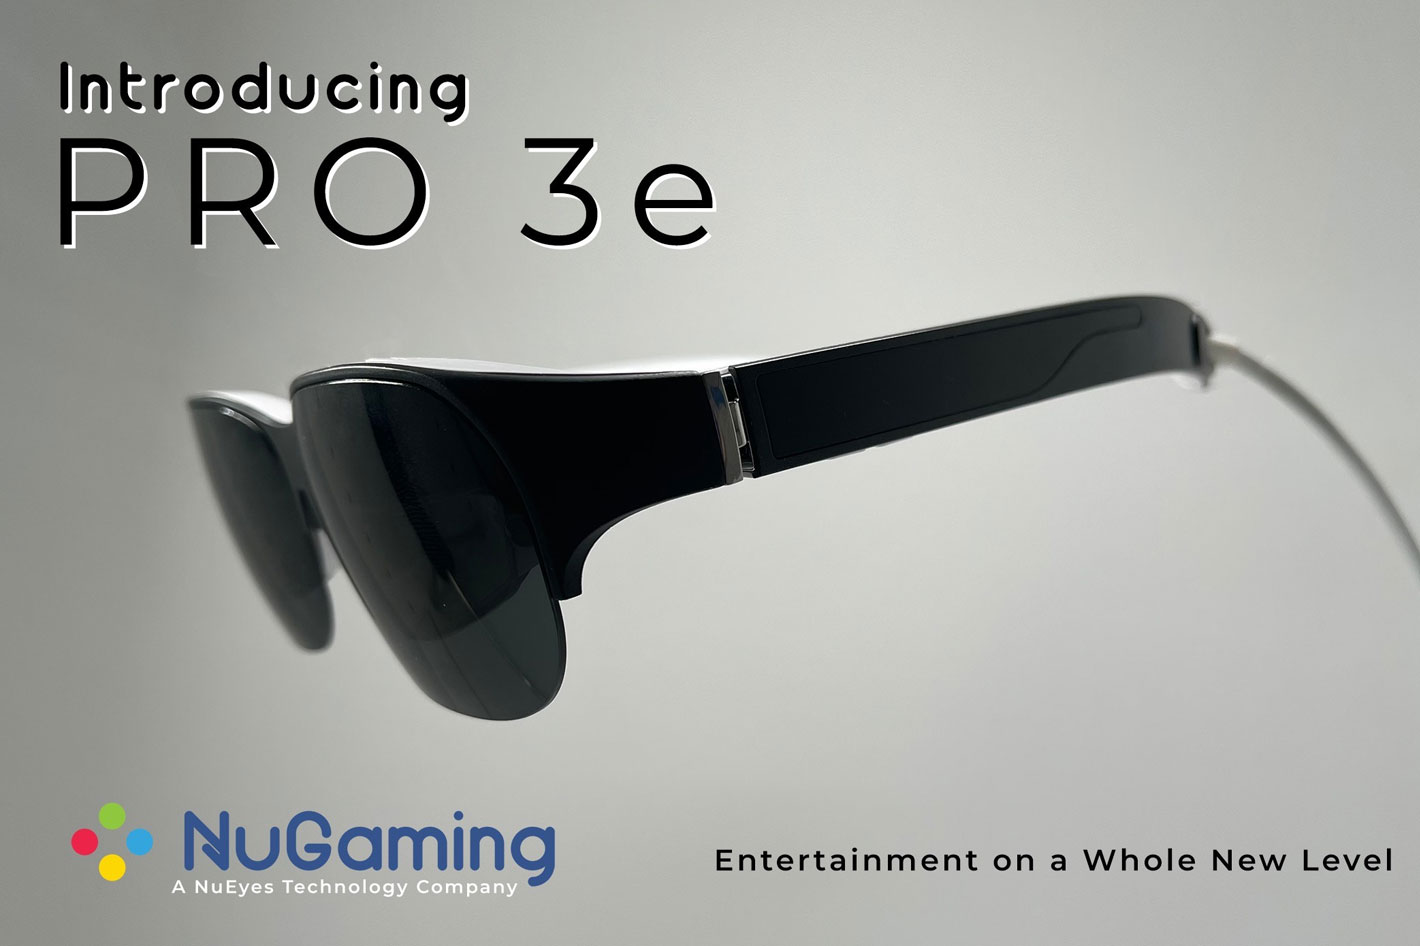 New Pro 3e smart glasses from NuEyes target entertainment